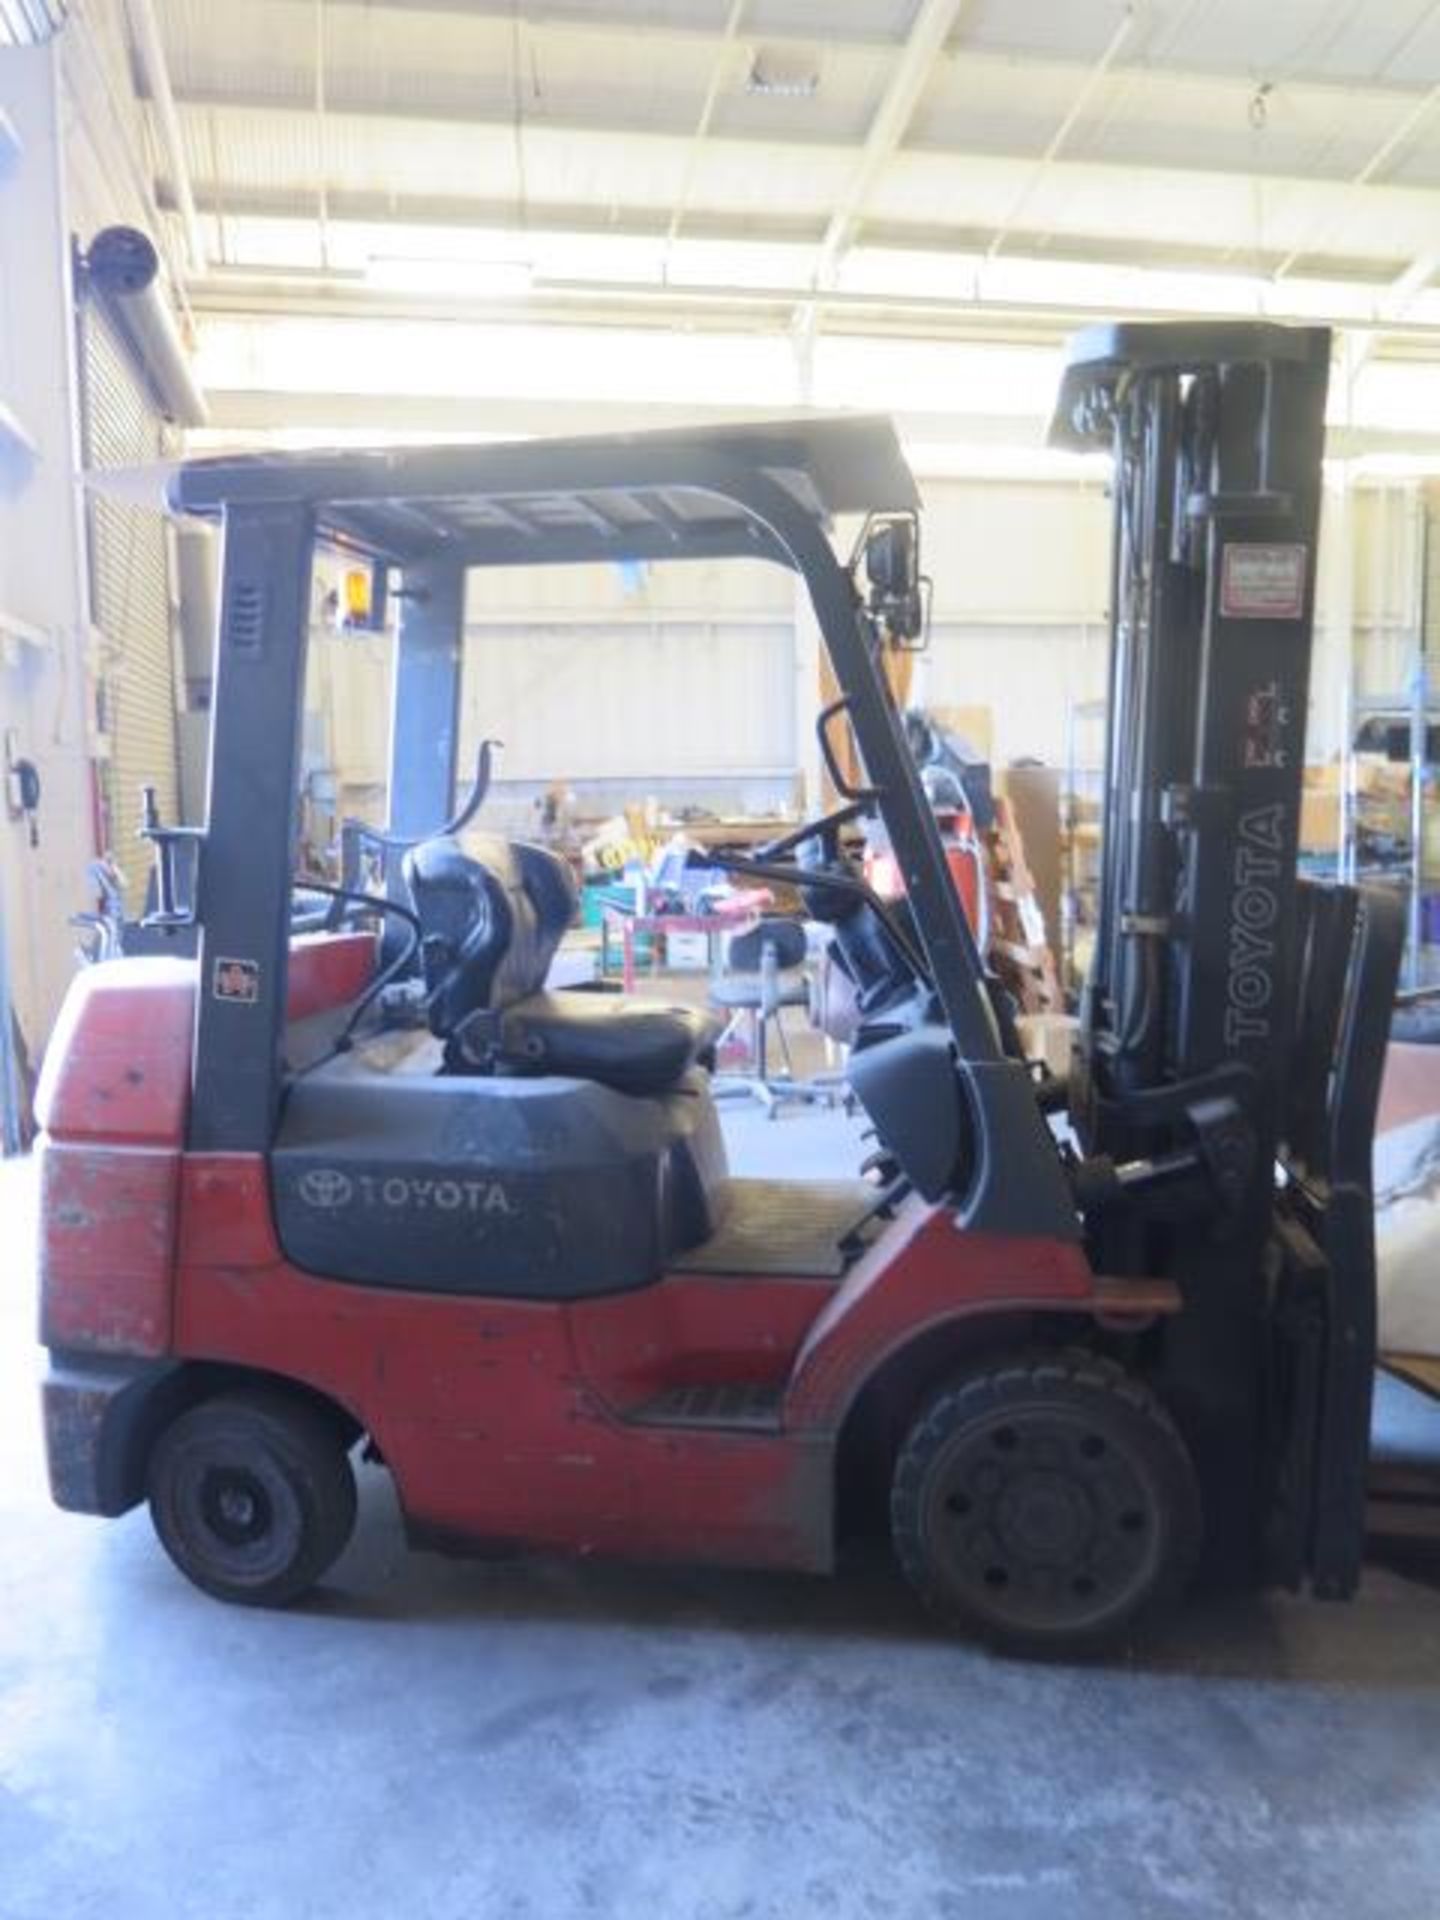 Toyota 7FGCU30 4750 Lb Cap LPG Forklift s/n 60080 w/ 3-Stage Mast, 188” Lift, Side Shift, SOLD AS IS - Image 4 of 13